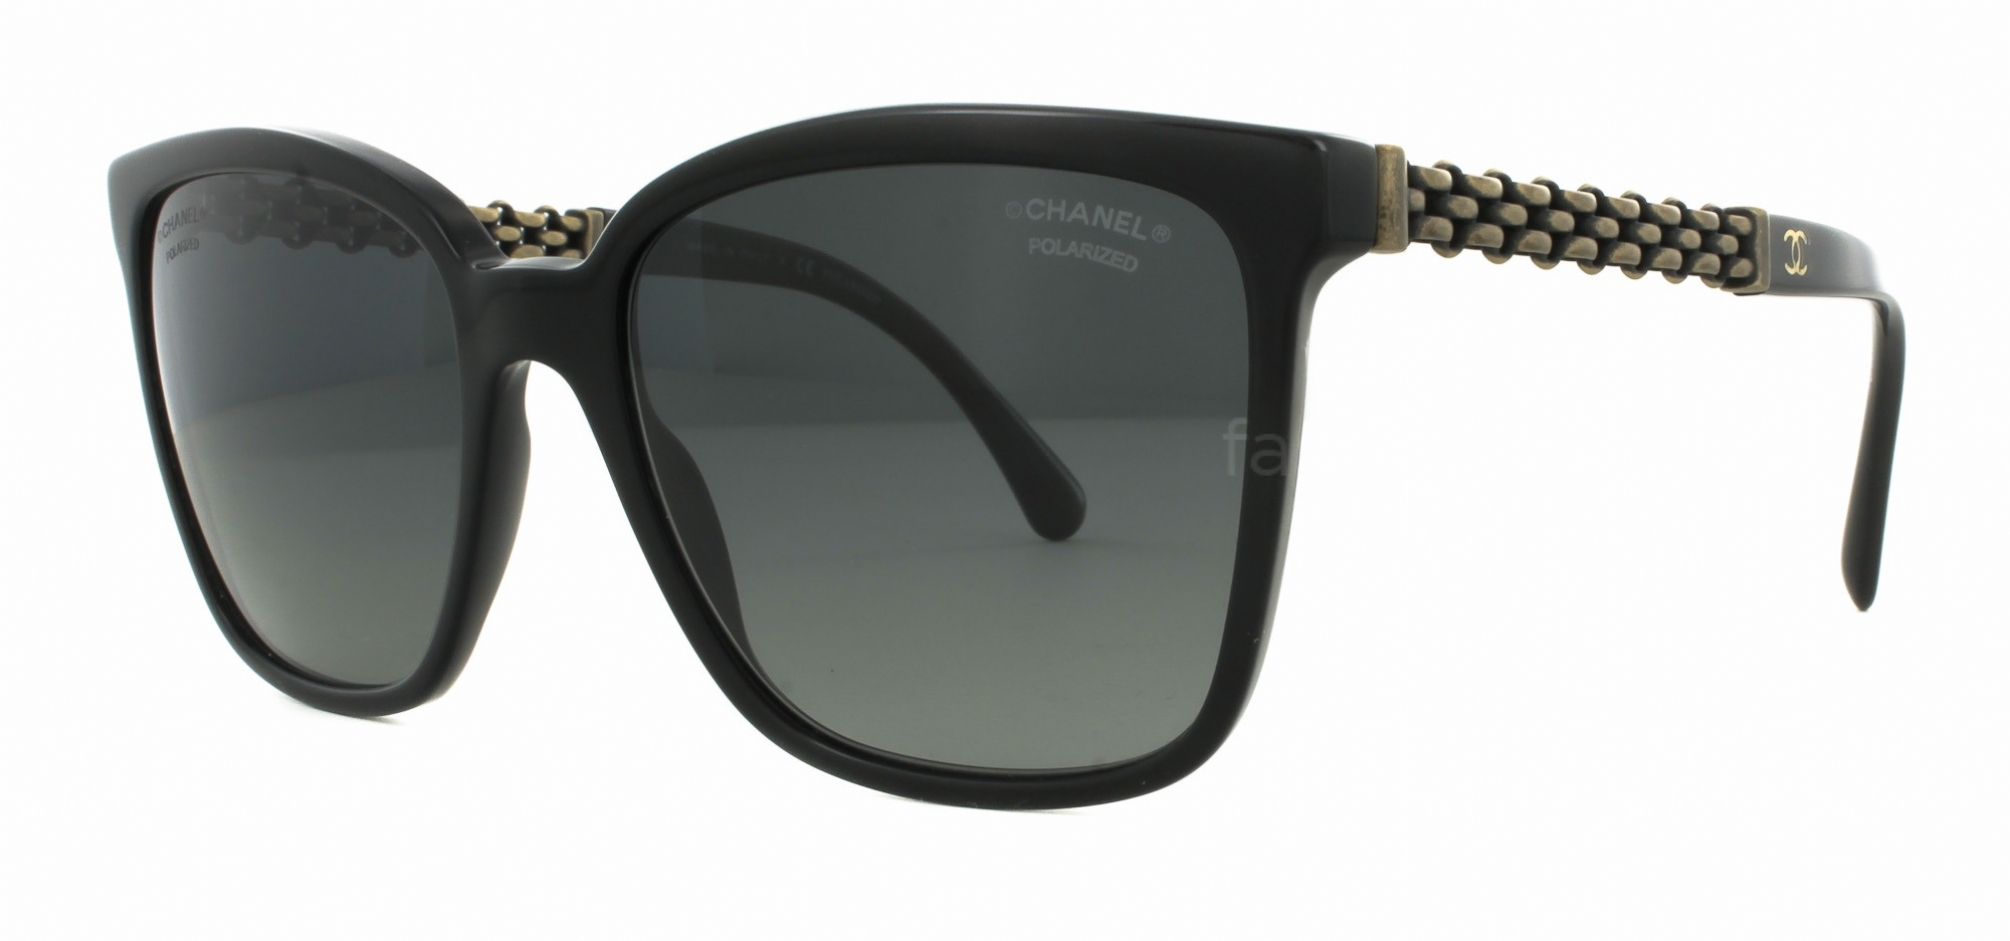 CHANEL 5325 501S8